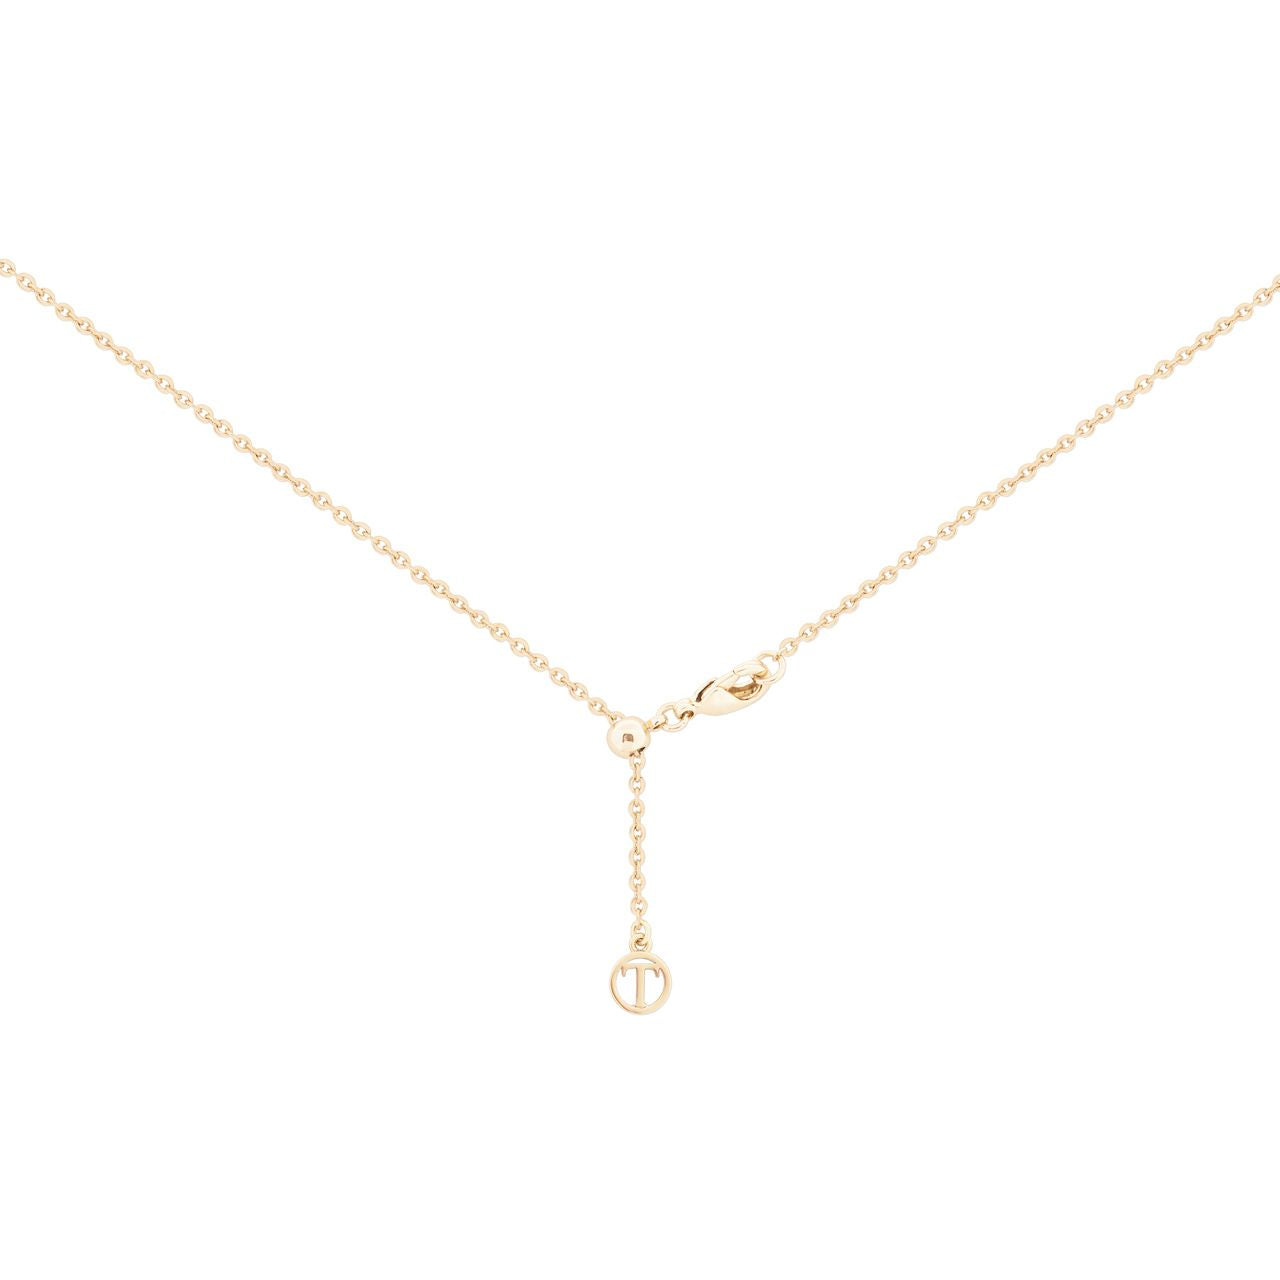 Expertly crafted by Tipperary, this stunning gold star pendant features a sparkling CZ insert. Elevate any outfit with this elegant and timeless piece, perfect for any occasion. Bring a touch of luxury and sophistication to your jewellery collection with the Tipperary Star Pendant.